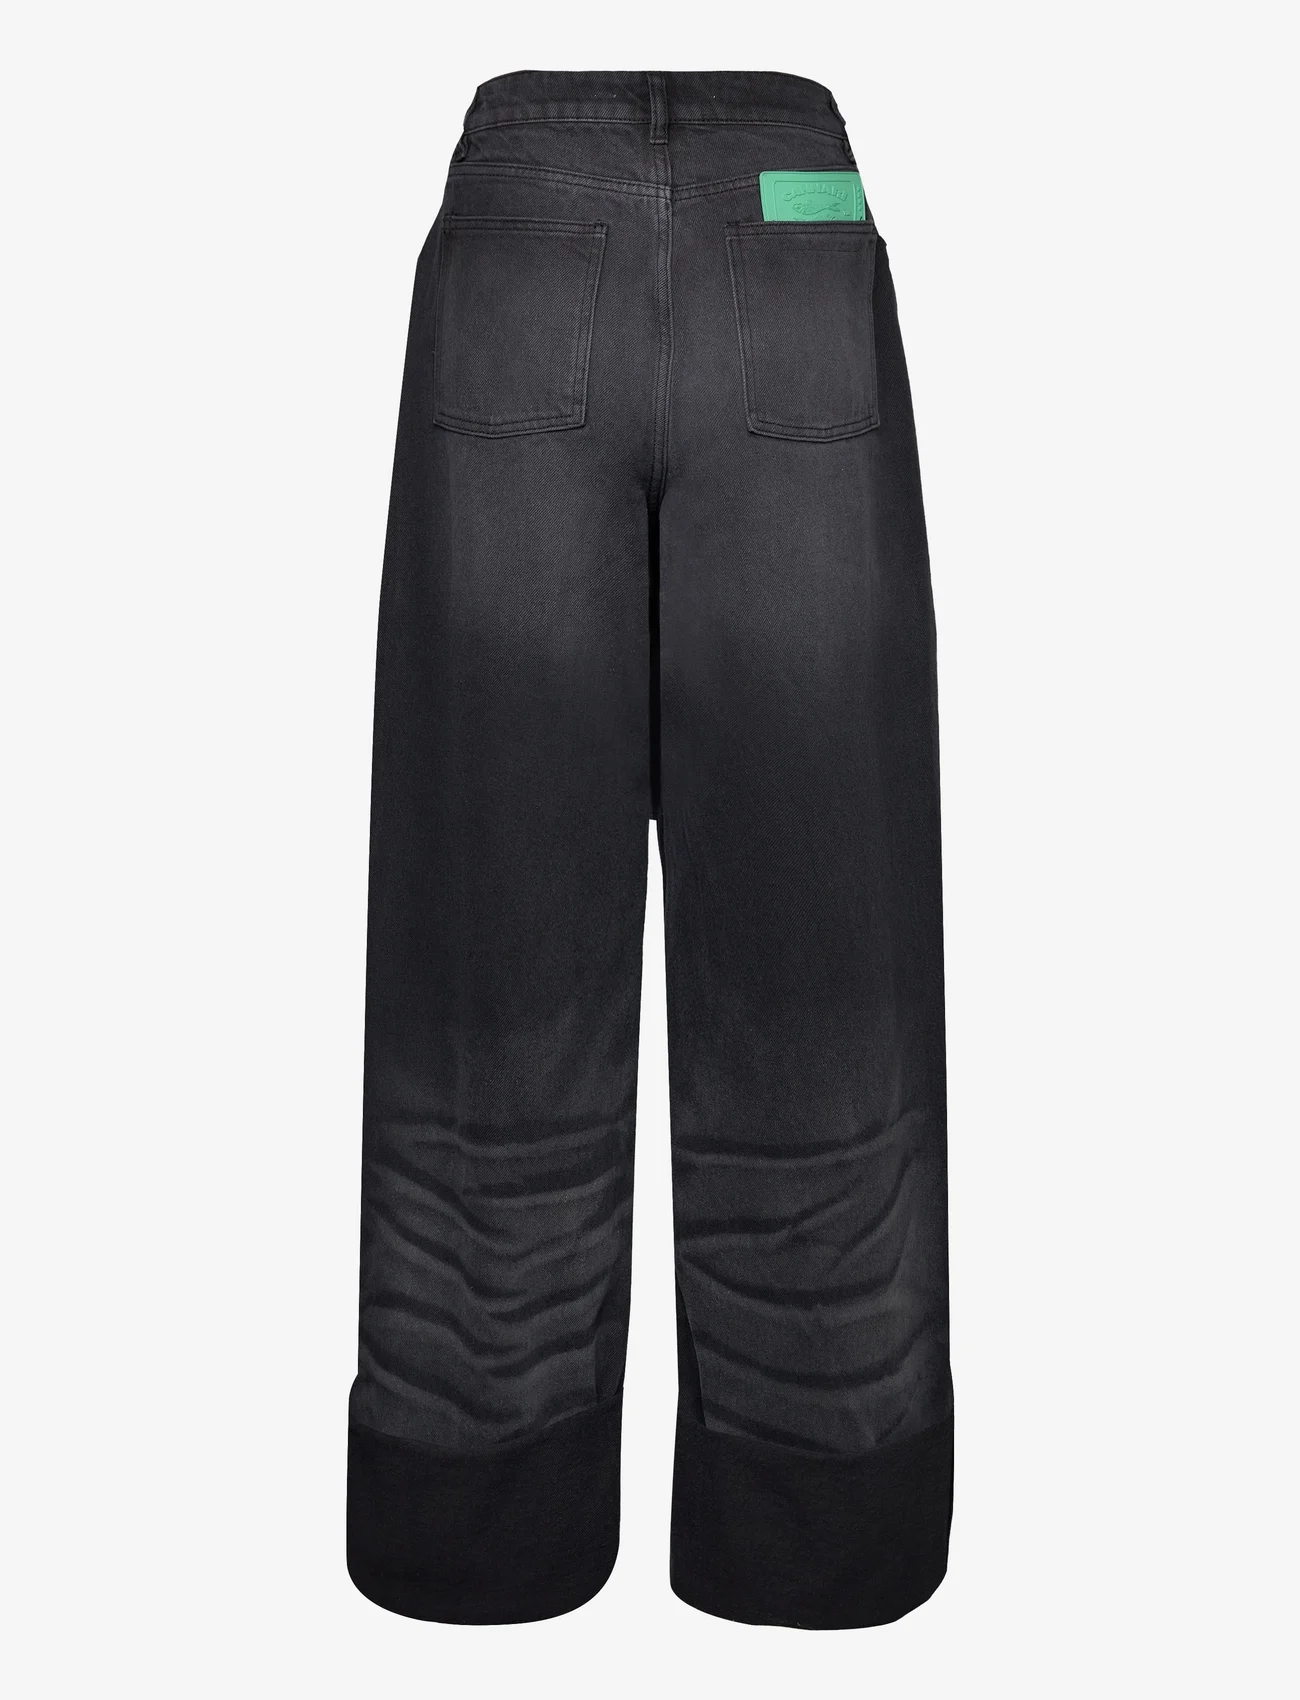 Cannari Concept - Black Wash Loose Jeans - vide jeans - forged iron - 1